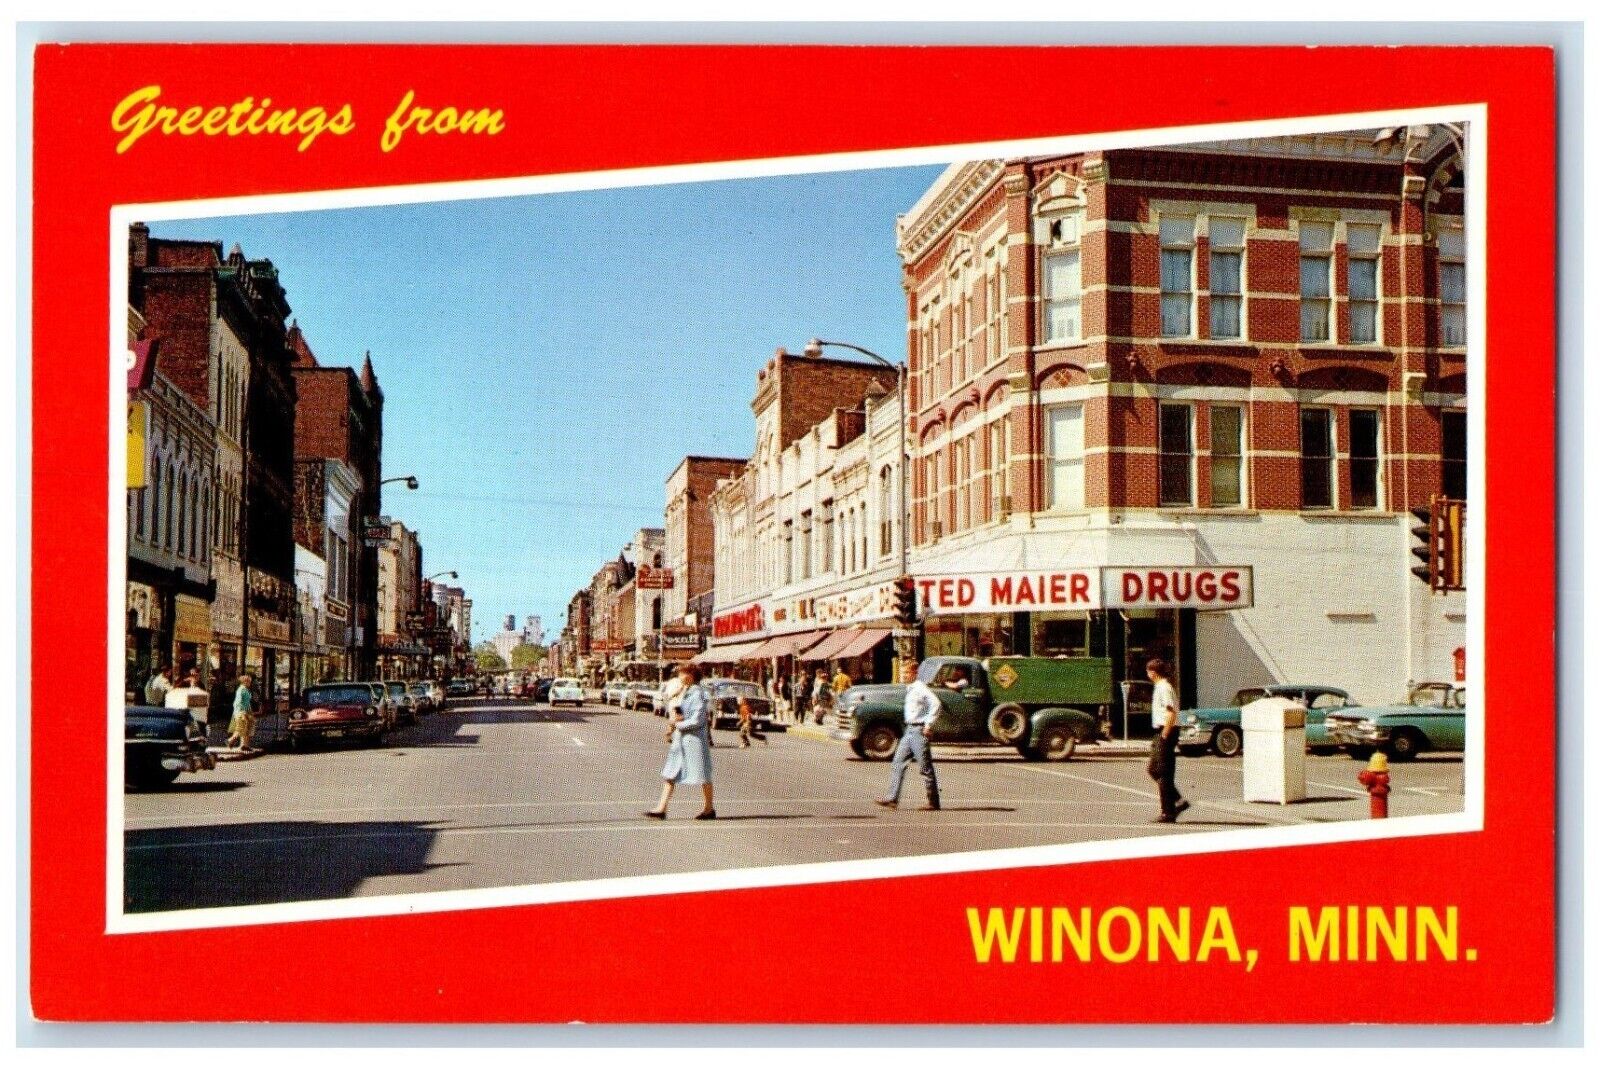 c1960 Greetings From Thriving Trade Center Mississippi Winona Minnesota Postcard